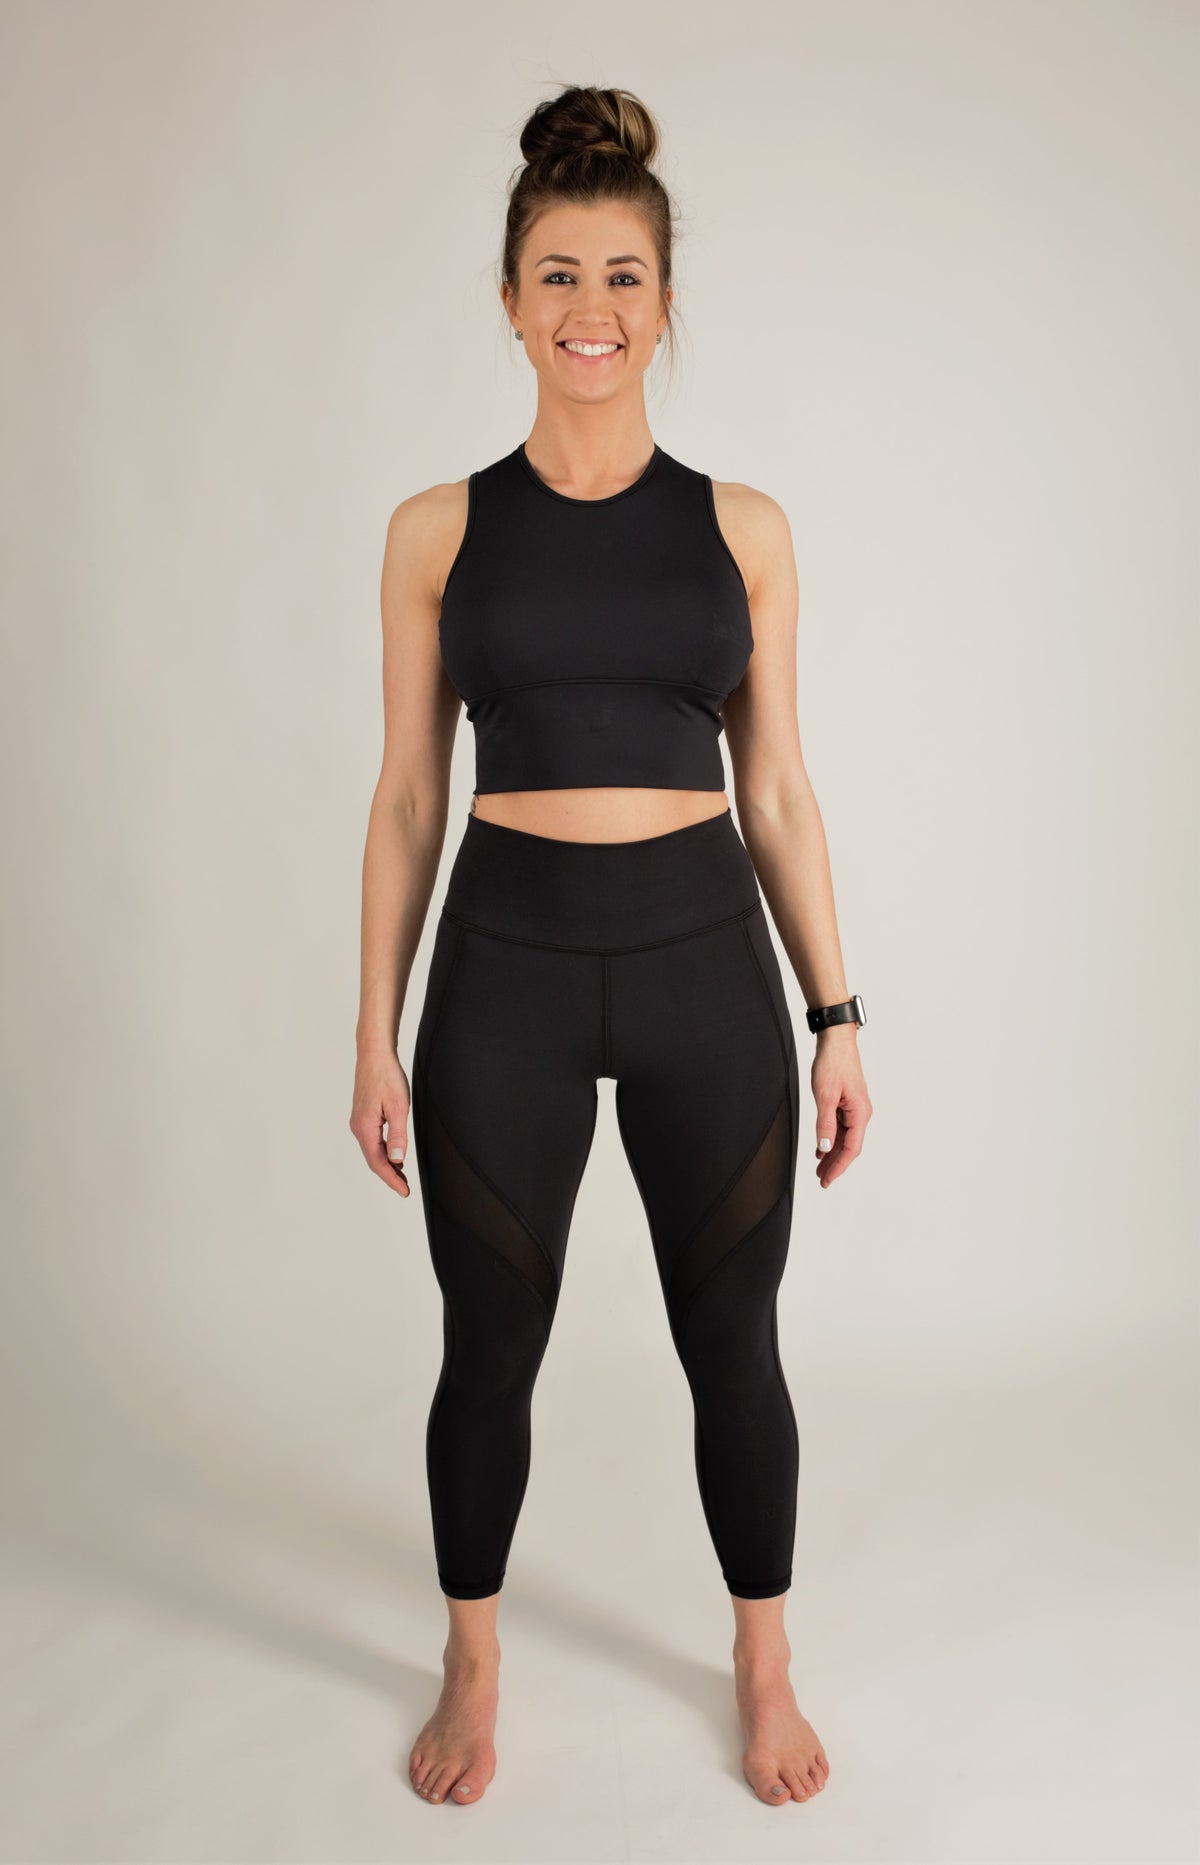 Black tummy control leggings and matching top